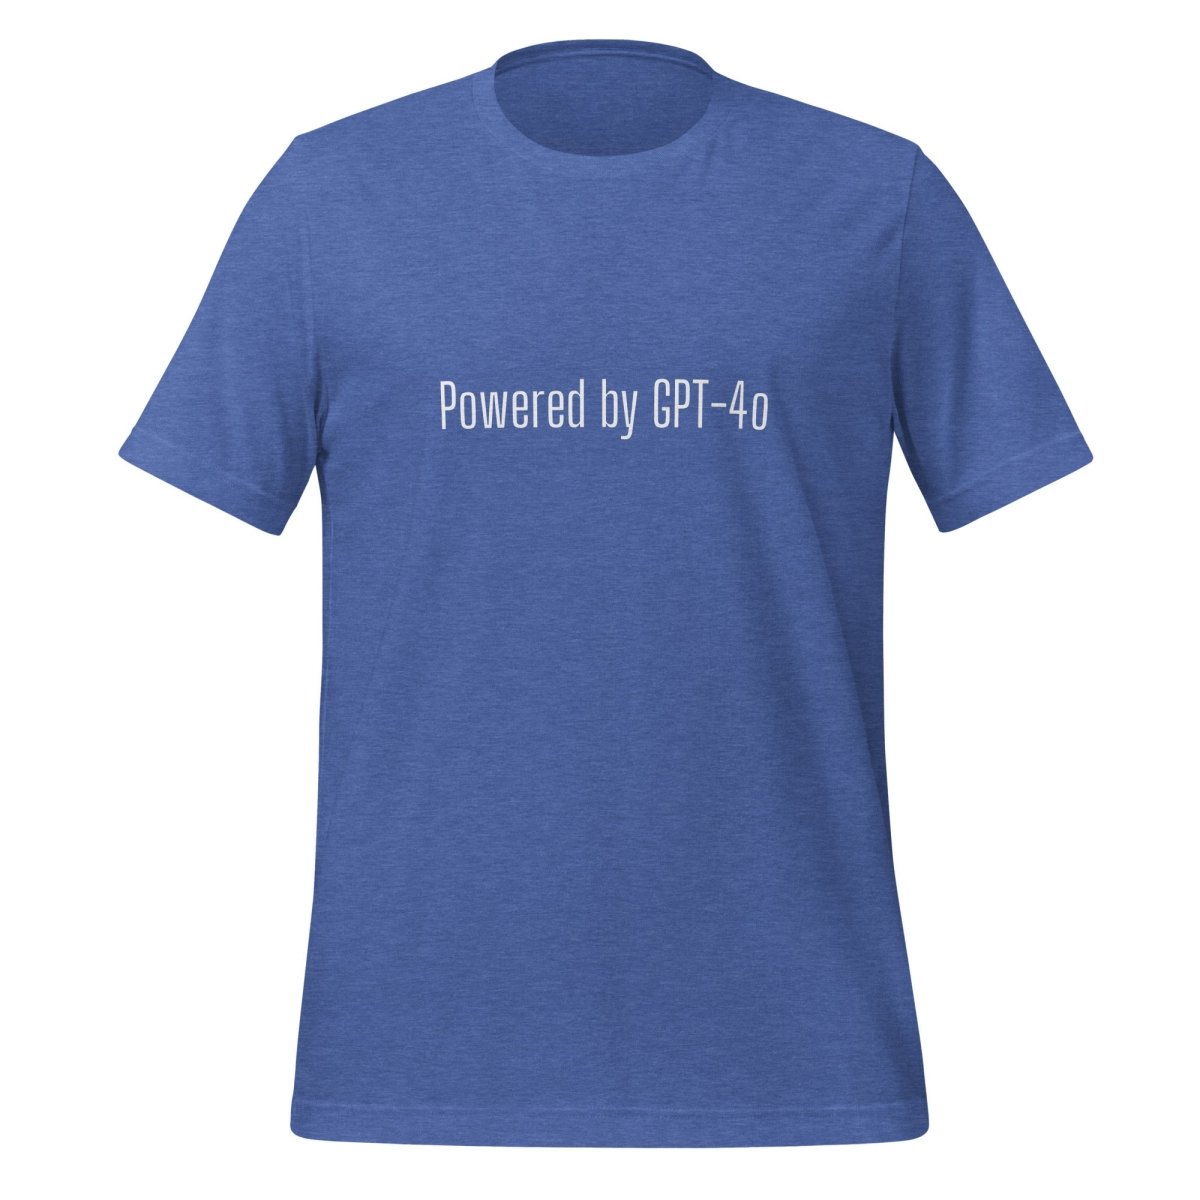 Powered by GPT - 4o T - Shirt 4 (unisex) - Heather True Royal - AI Store